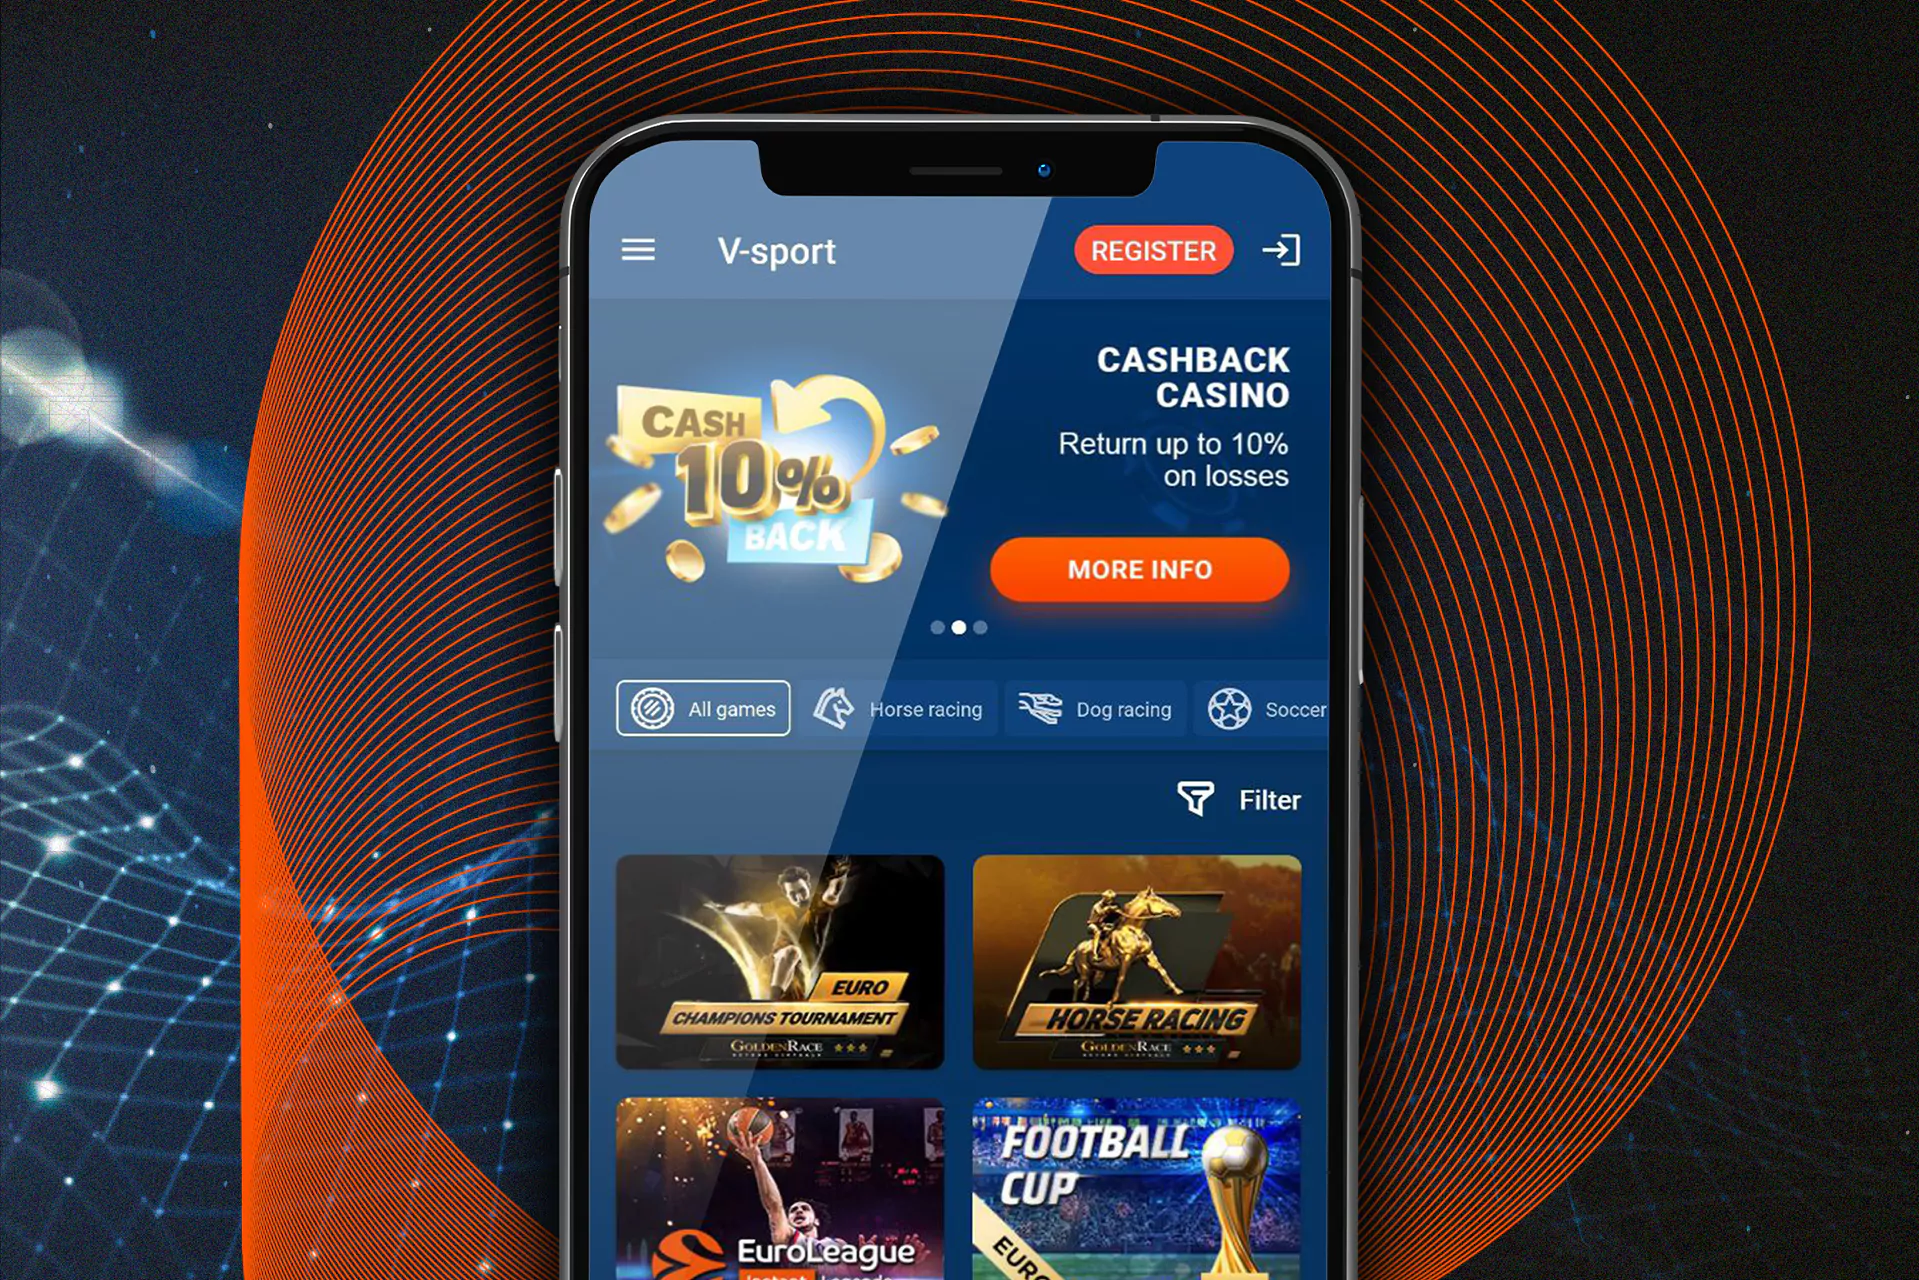 The v-sports section of the app.